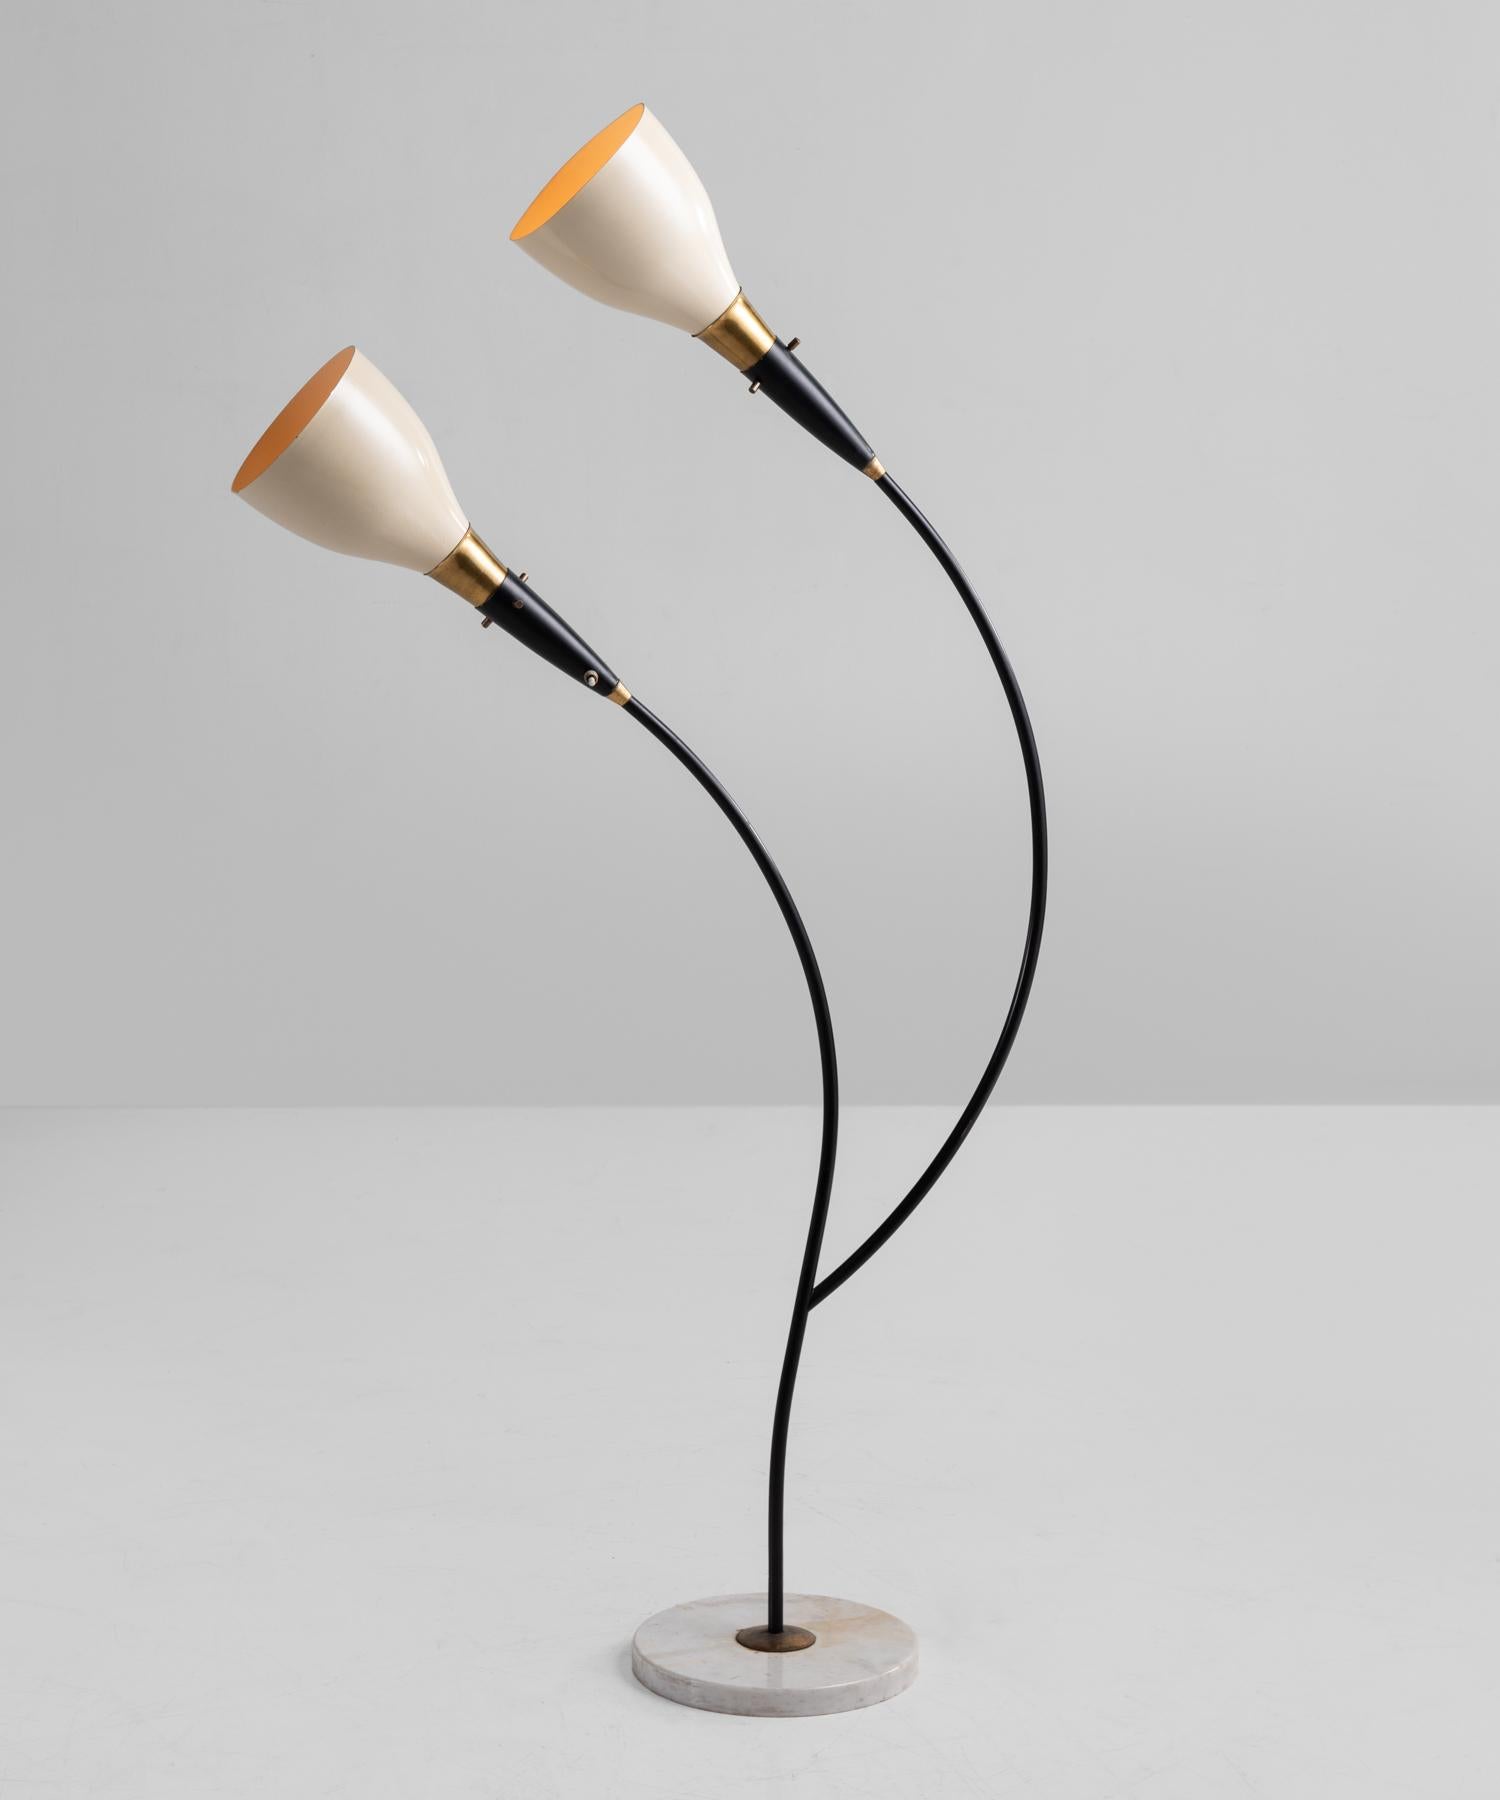 Double arc floor lamp, circa 1960

Unique form with brass hardware and cream enamel shades on marble base.